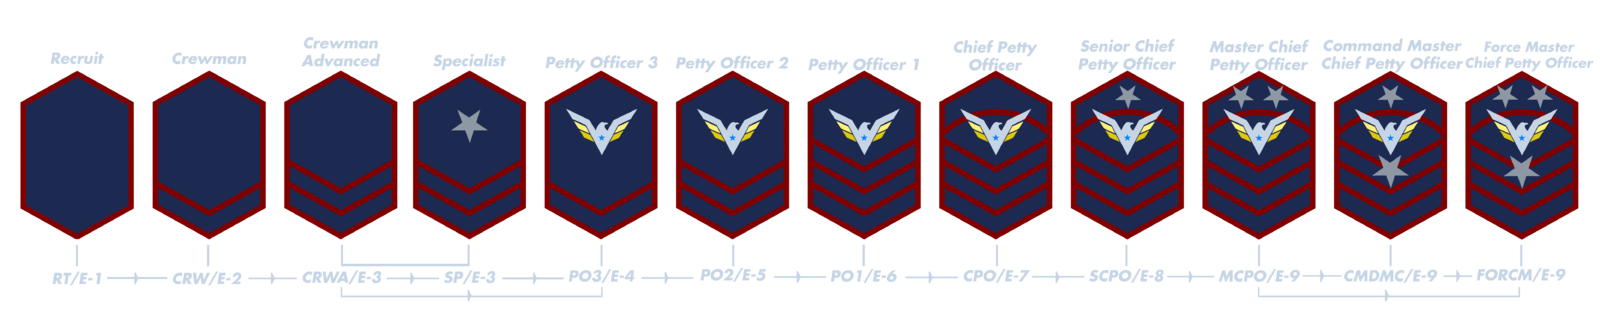 Navy Enlisted Row.png